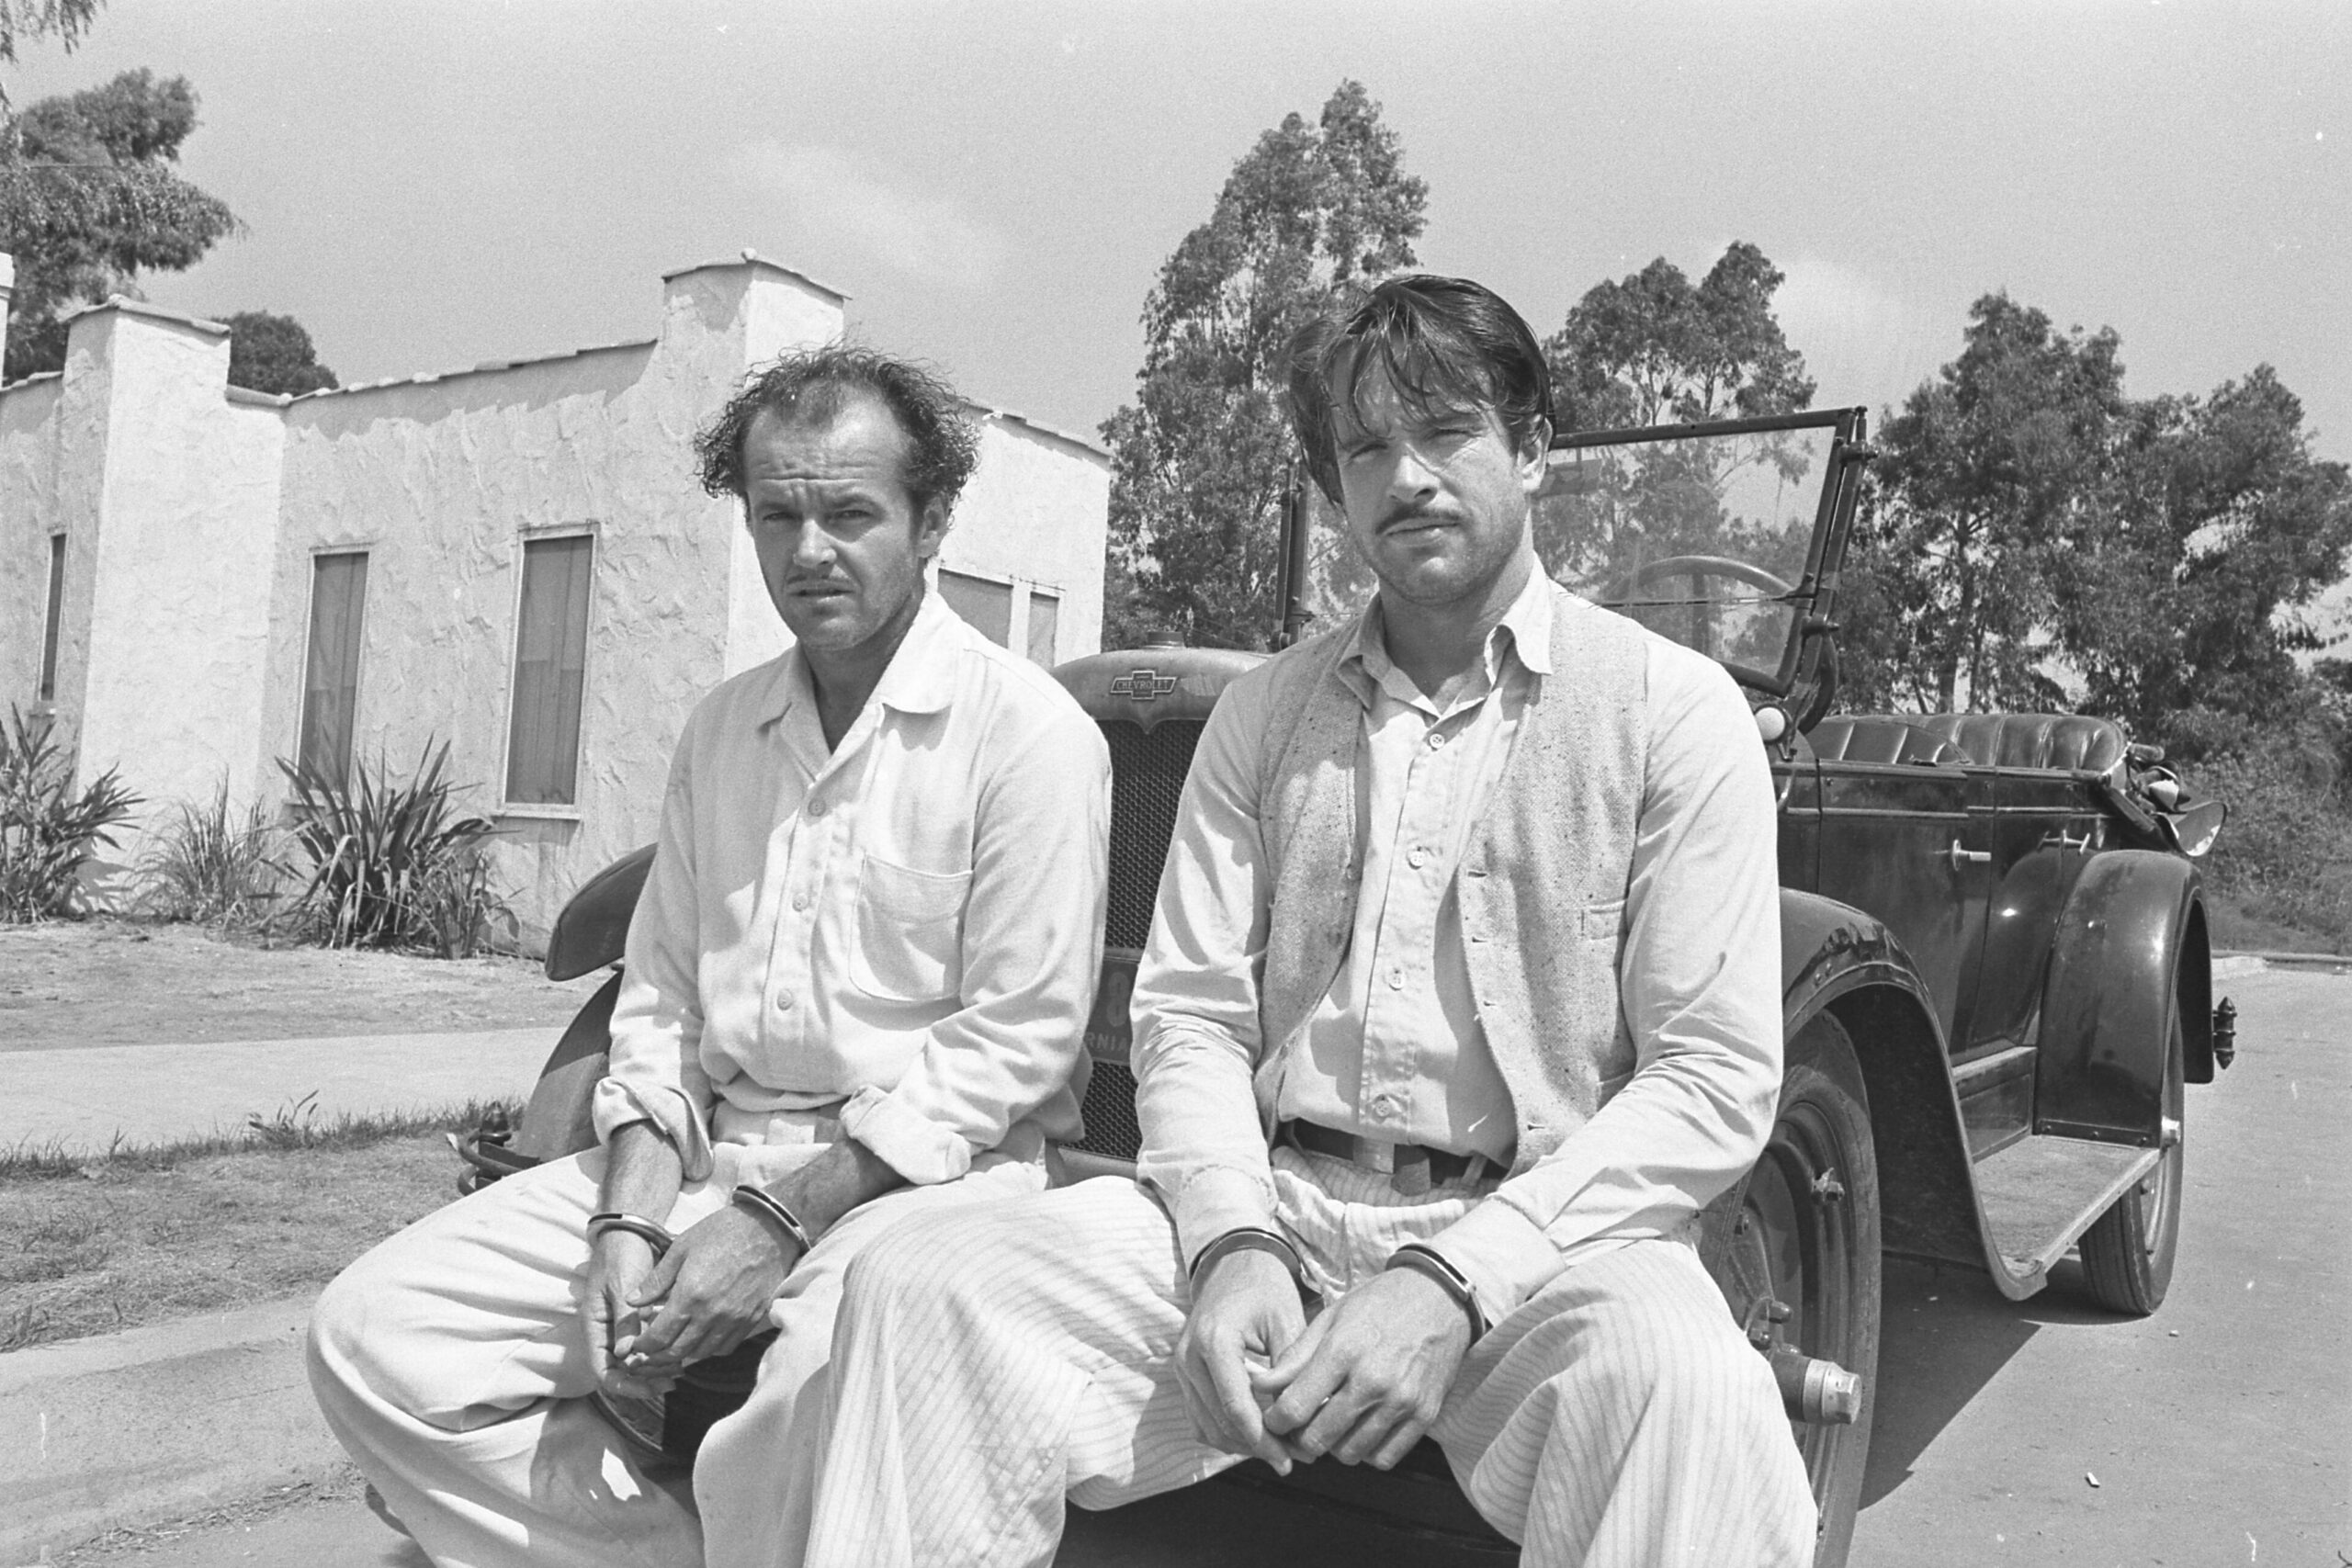 Jack_Nicholson_and_Warren_Beatty_during_filming_of_the_motion_picture__The_Fortune,__in_Los_Angeles,_Calif.,_1974